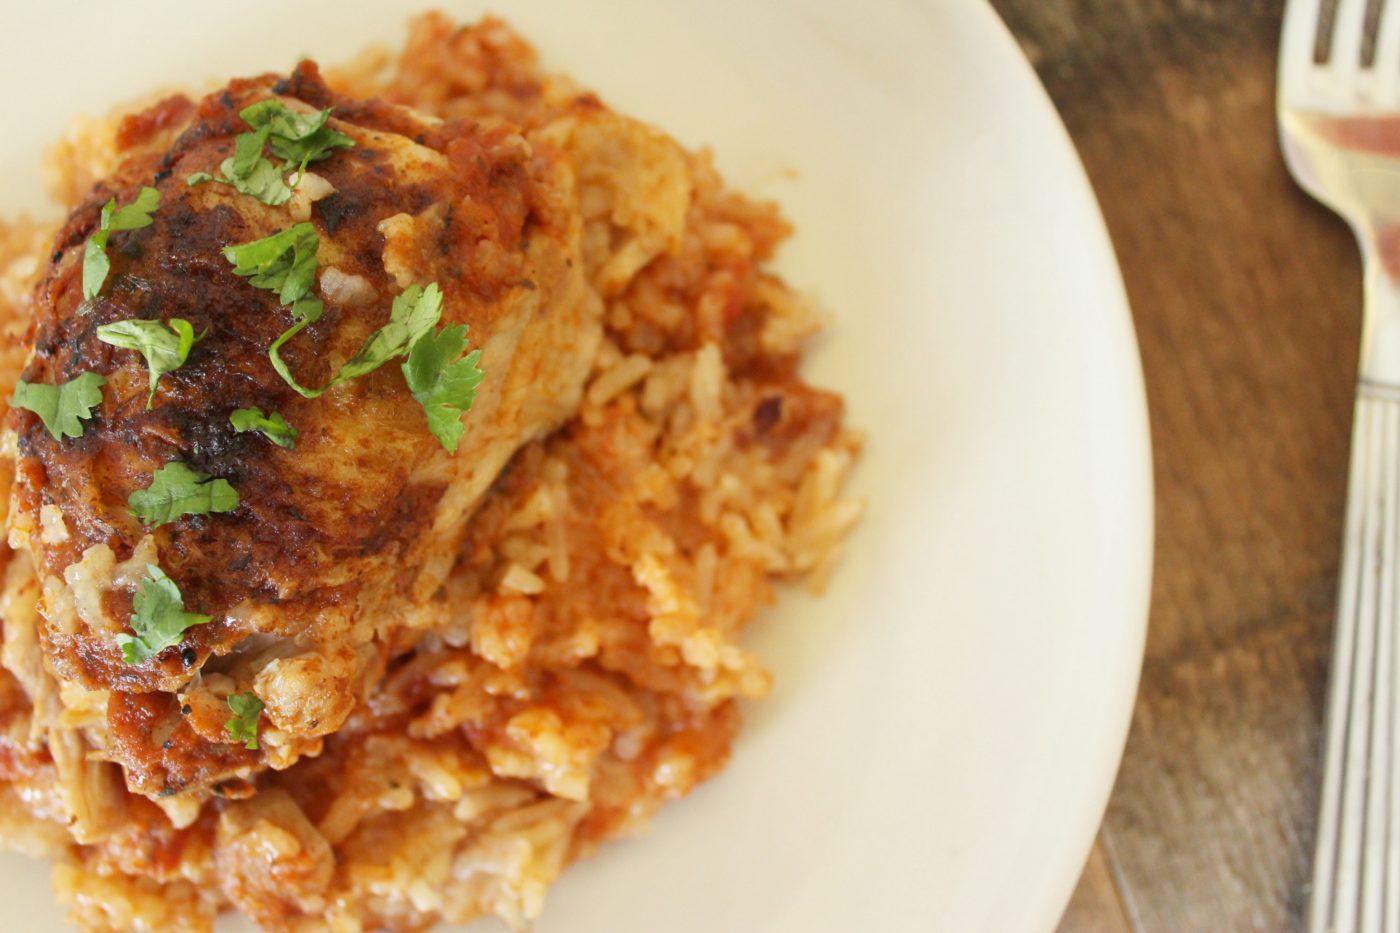 Easy weeknight meal option: slow cooker Creole chicken. Just throw it in the slow cooker and tackle your to do list.